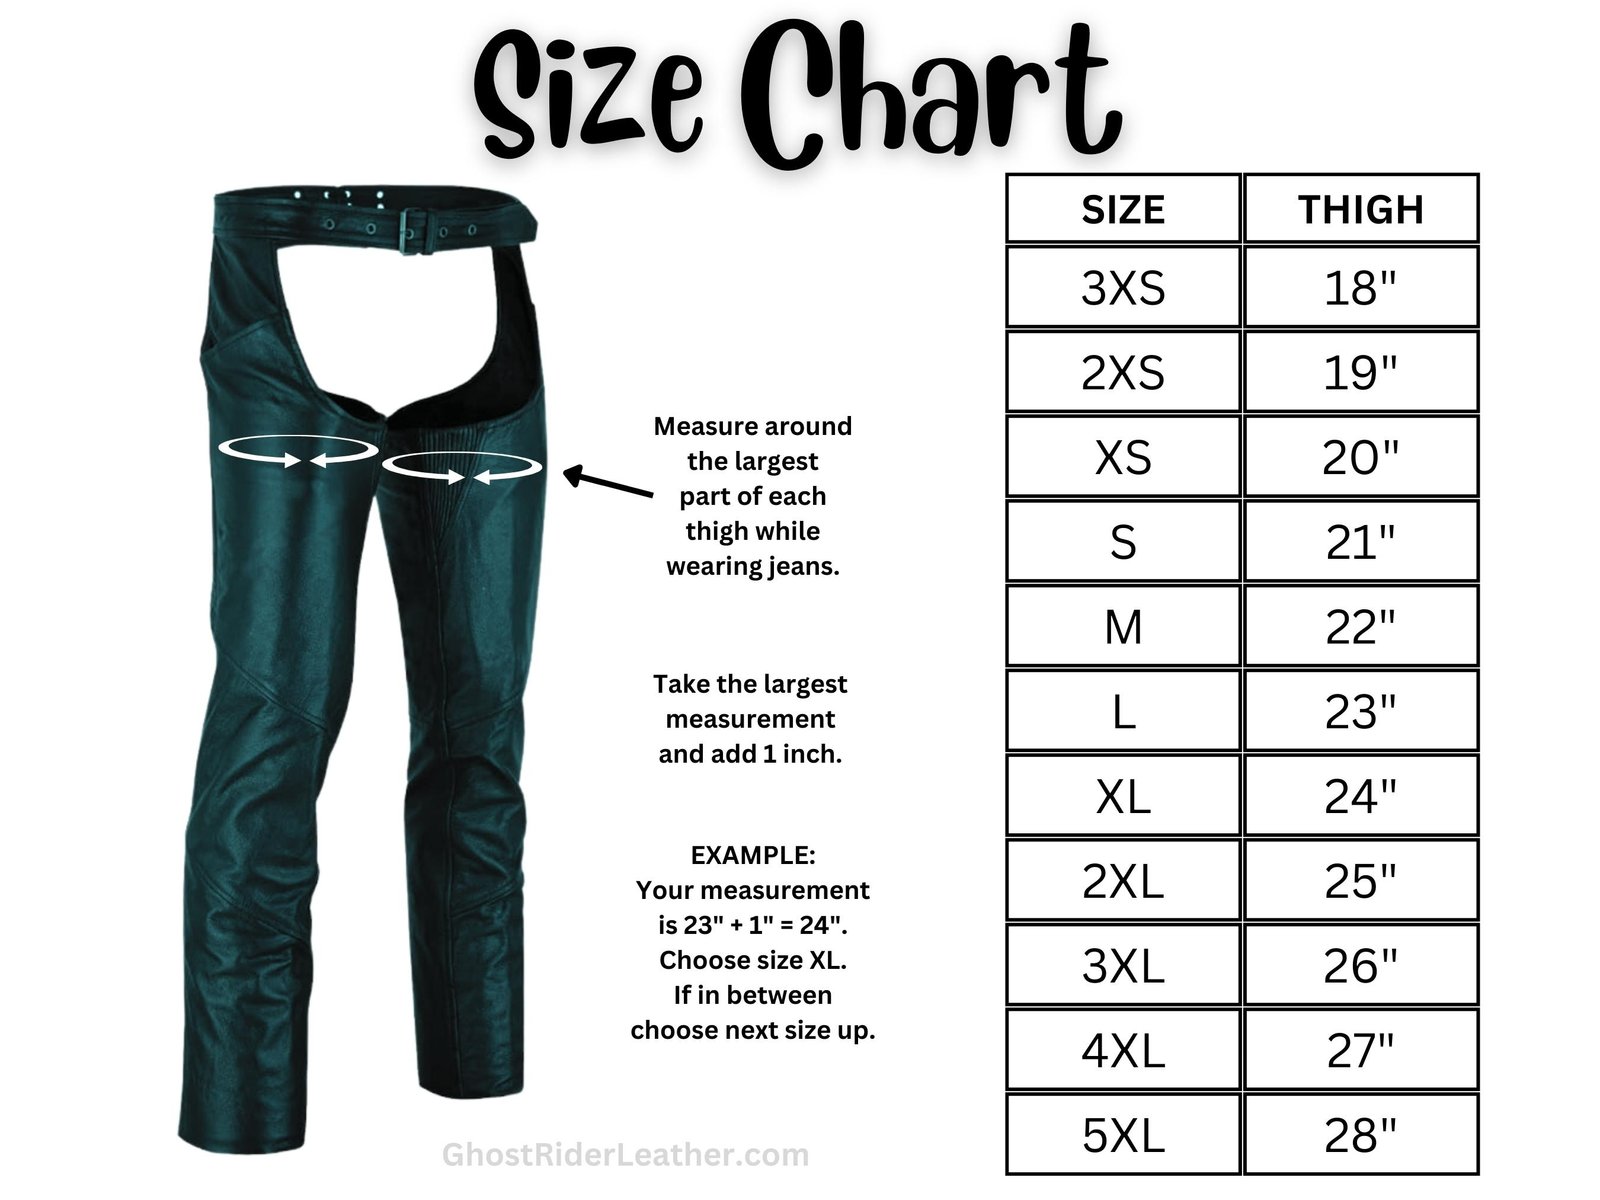 Size chart for women's leather motorcycle chaps.